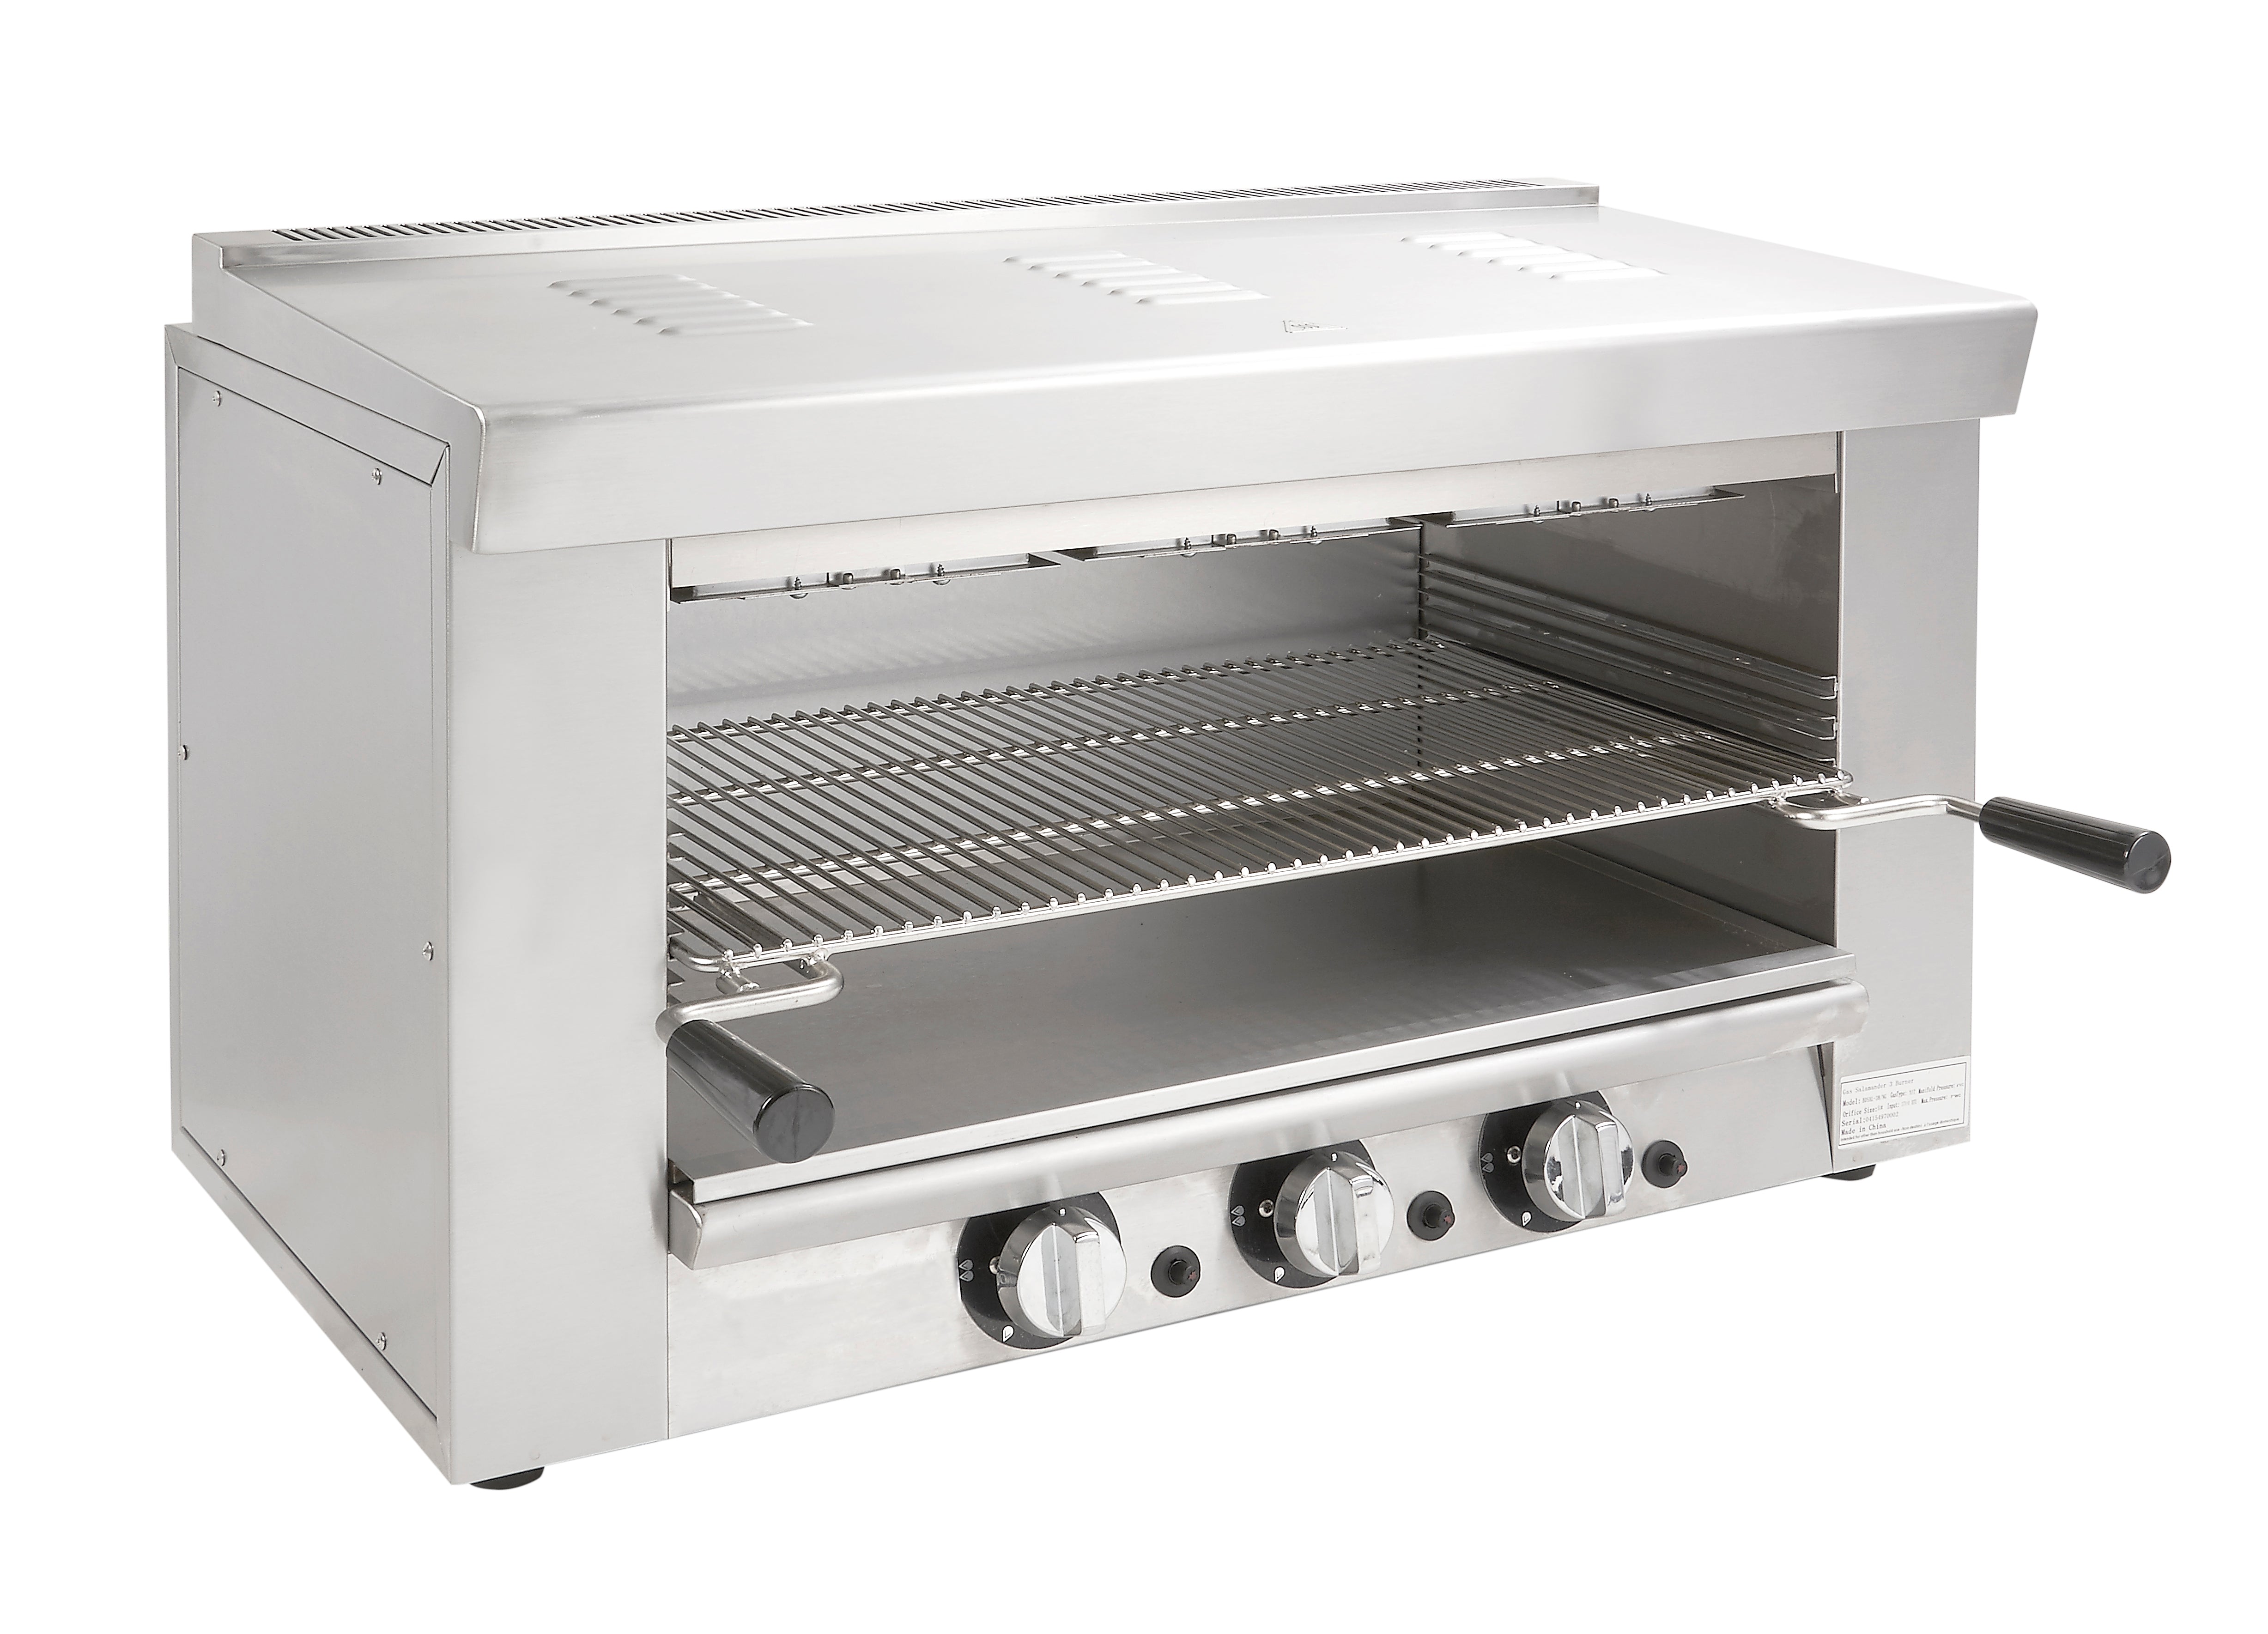 Adcraft CHM-4350W Cheesemelter, Electric